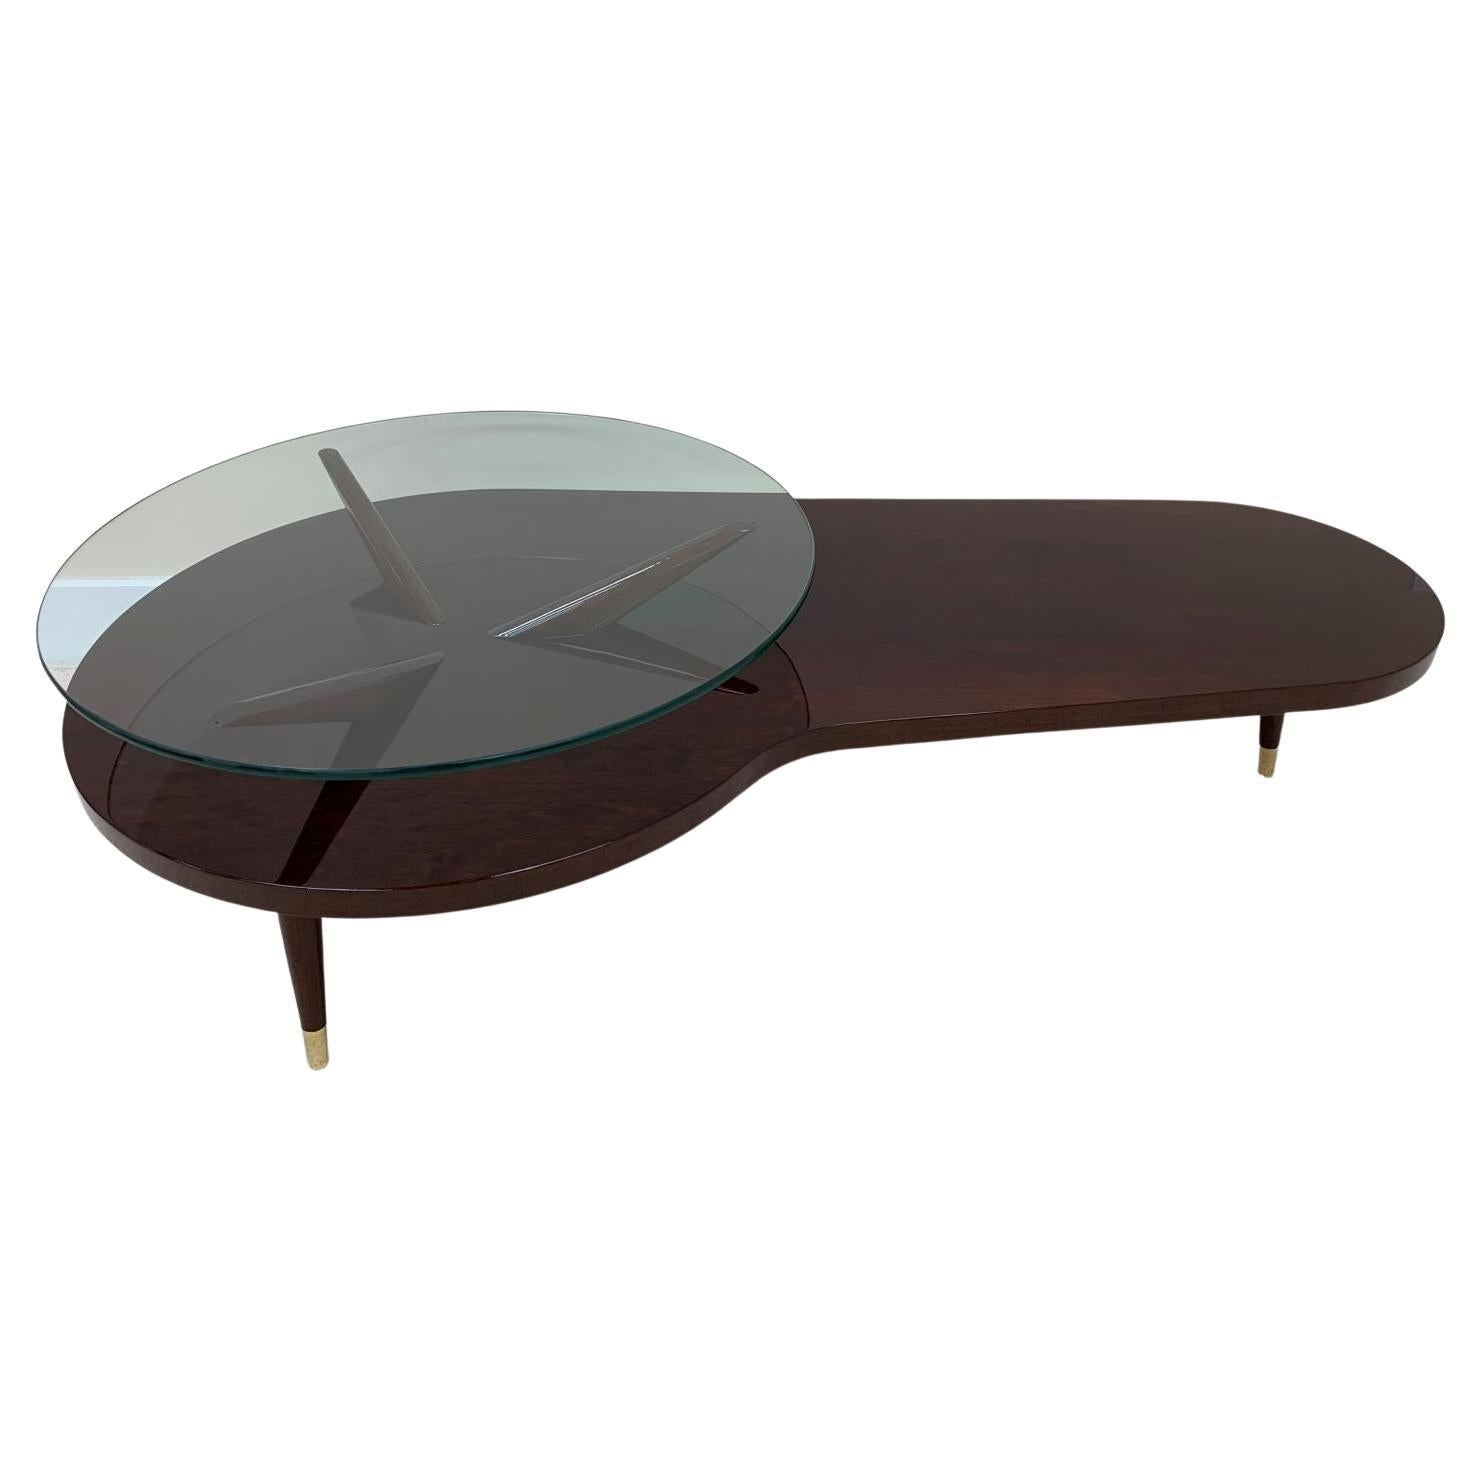 Spectacular American Modern Biomorphic Mid Century Cocktail Table C.1950’s For Sale 6